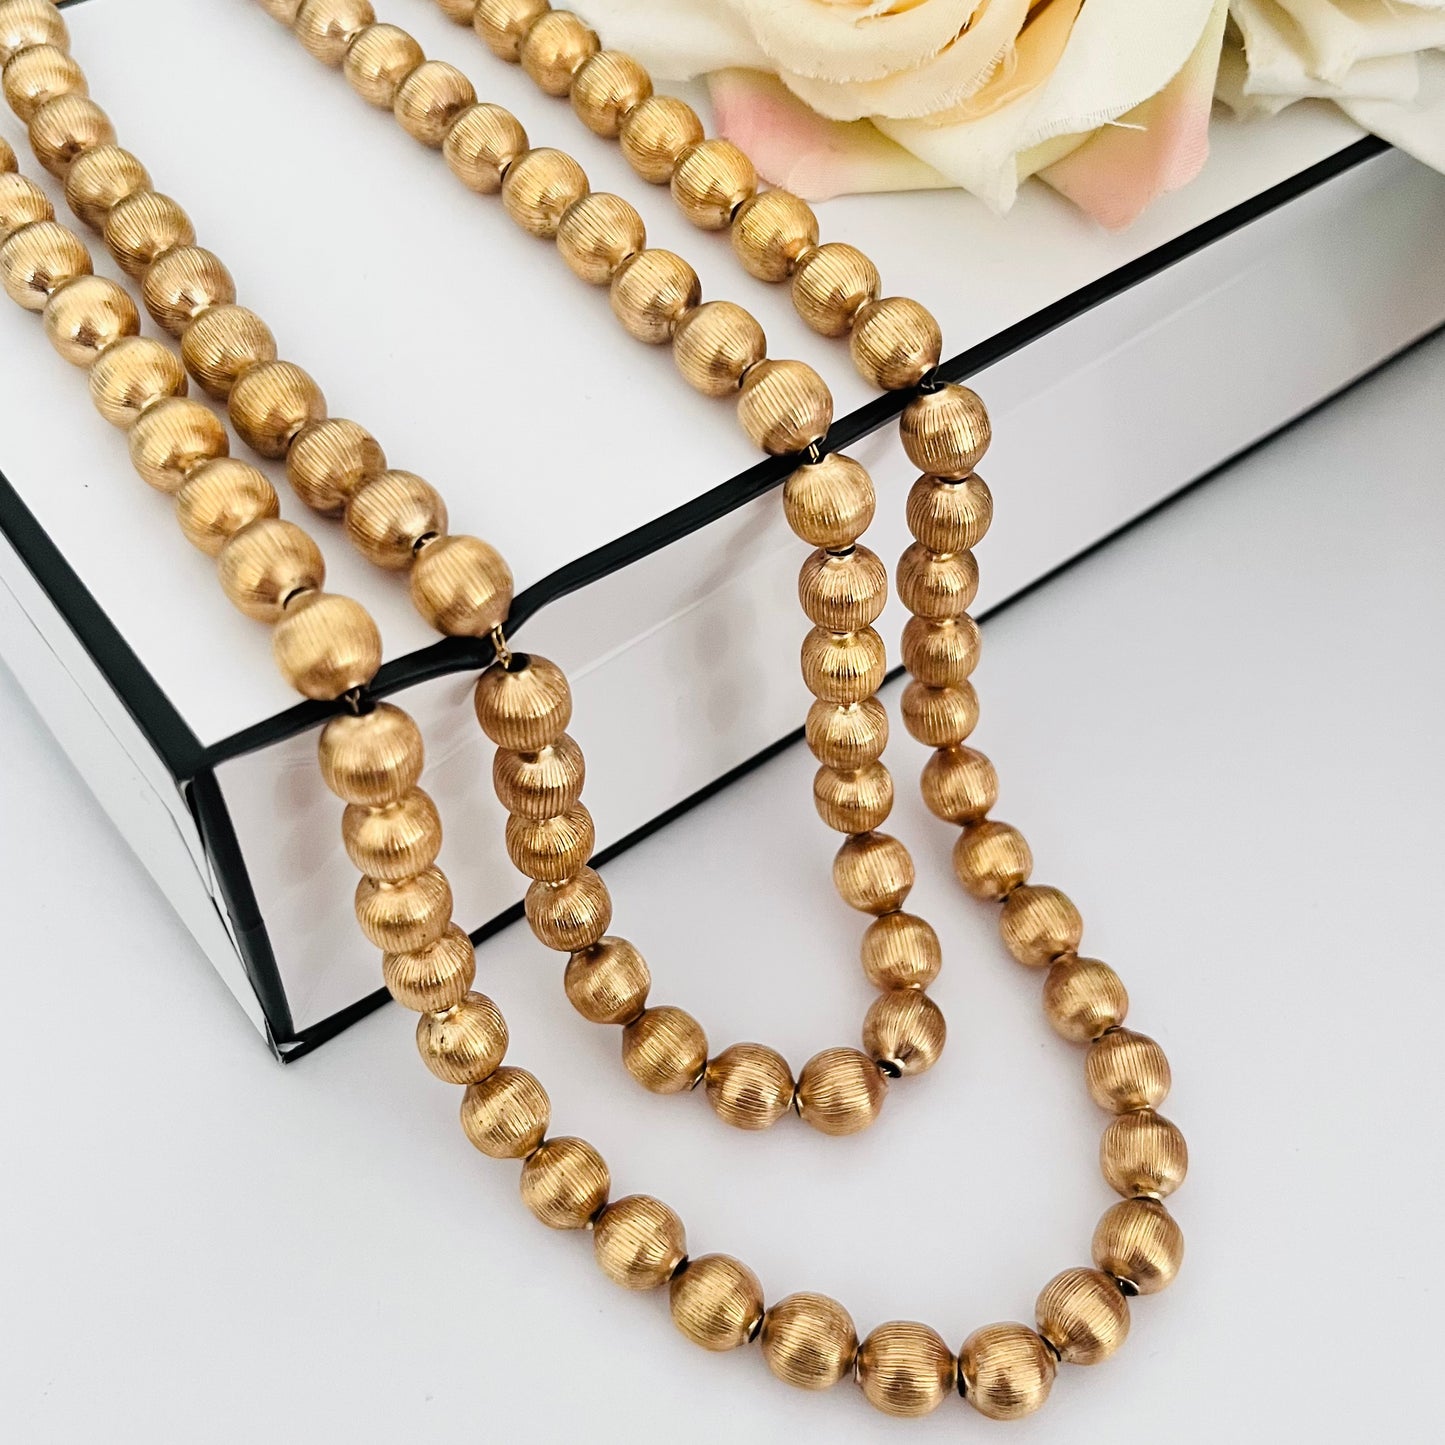 1960s Trifari Gold Plated Ball Chain Multistrand Statement Necklace